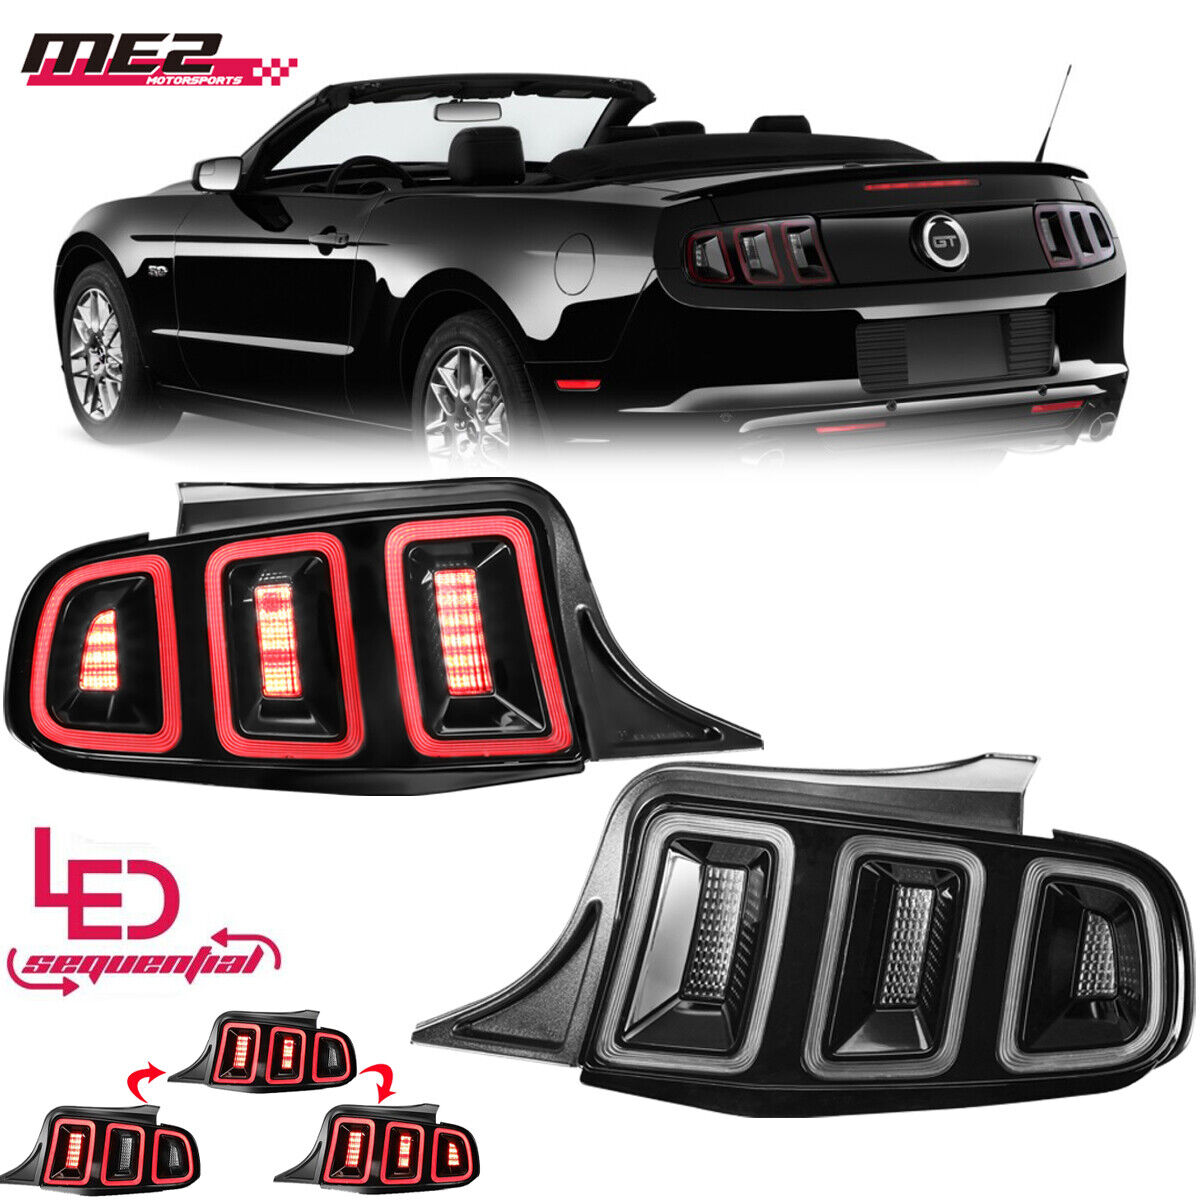 LED Sequential Tail Lights For 2010-2014 Ford Mustang Turn Signal Rear Lamps